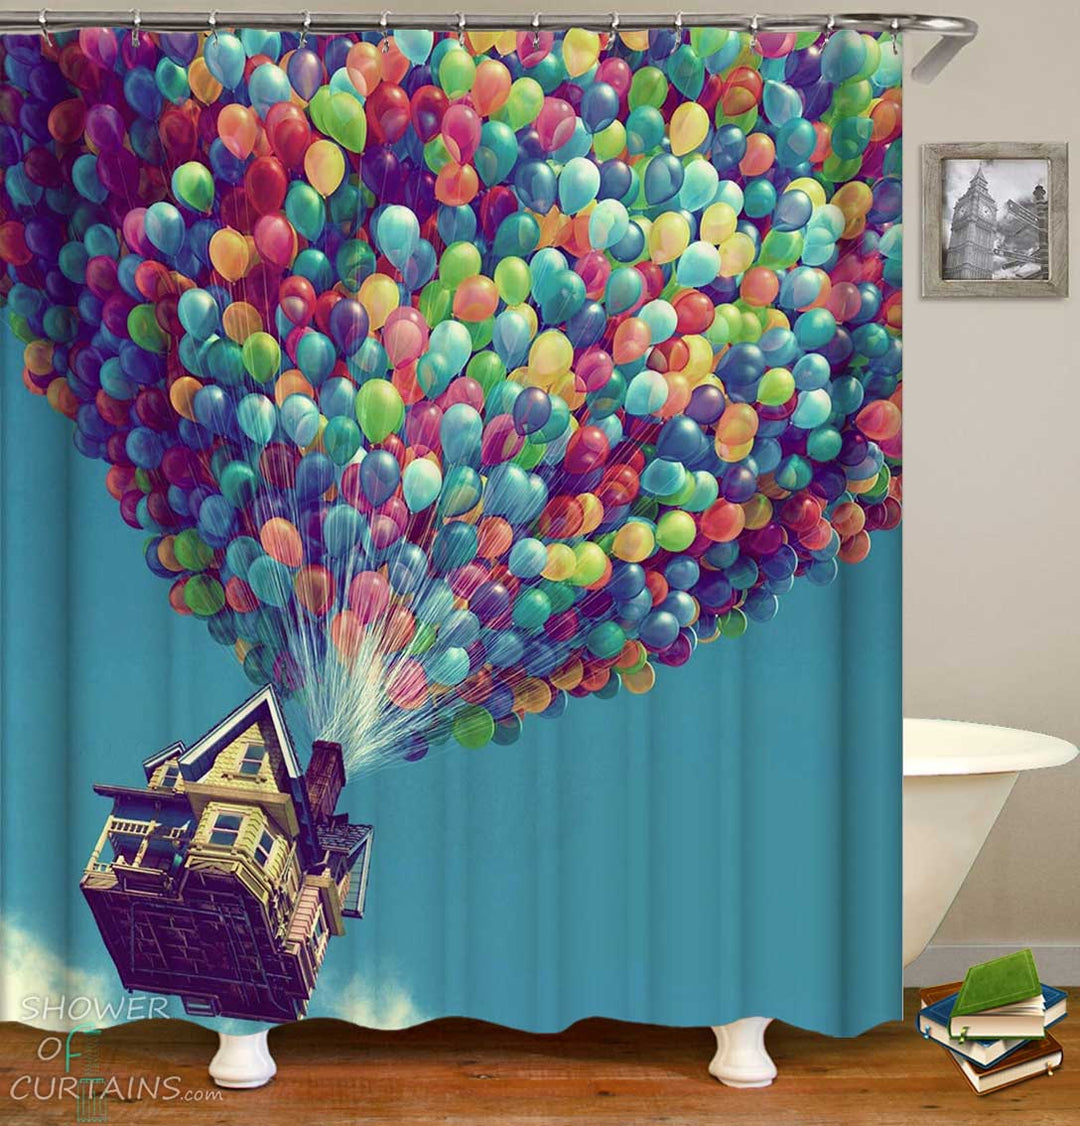 Shower Curtains with Cool Colorful Balloons Flying House